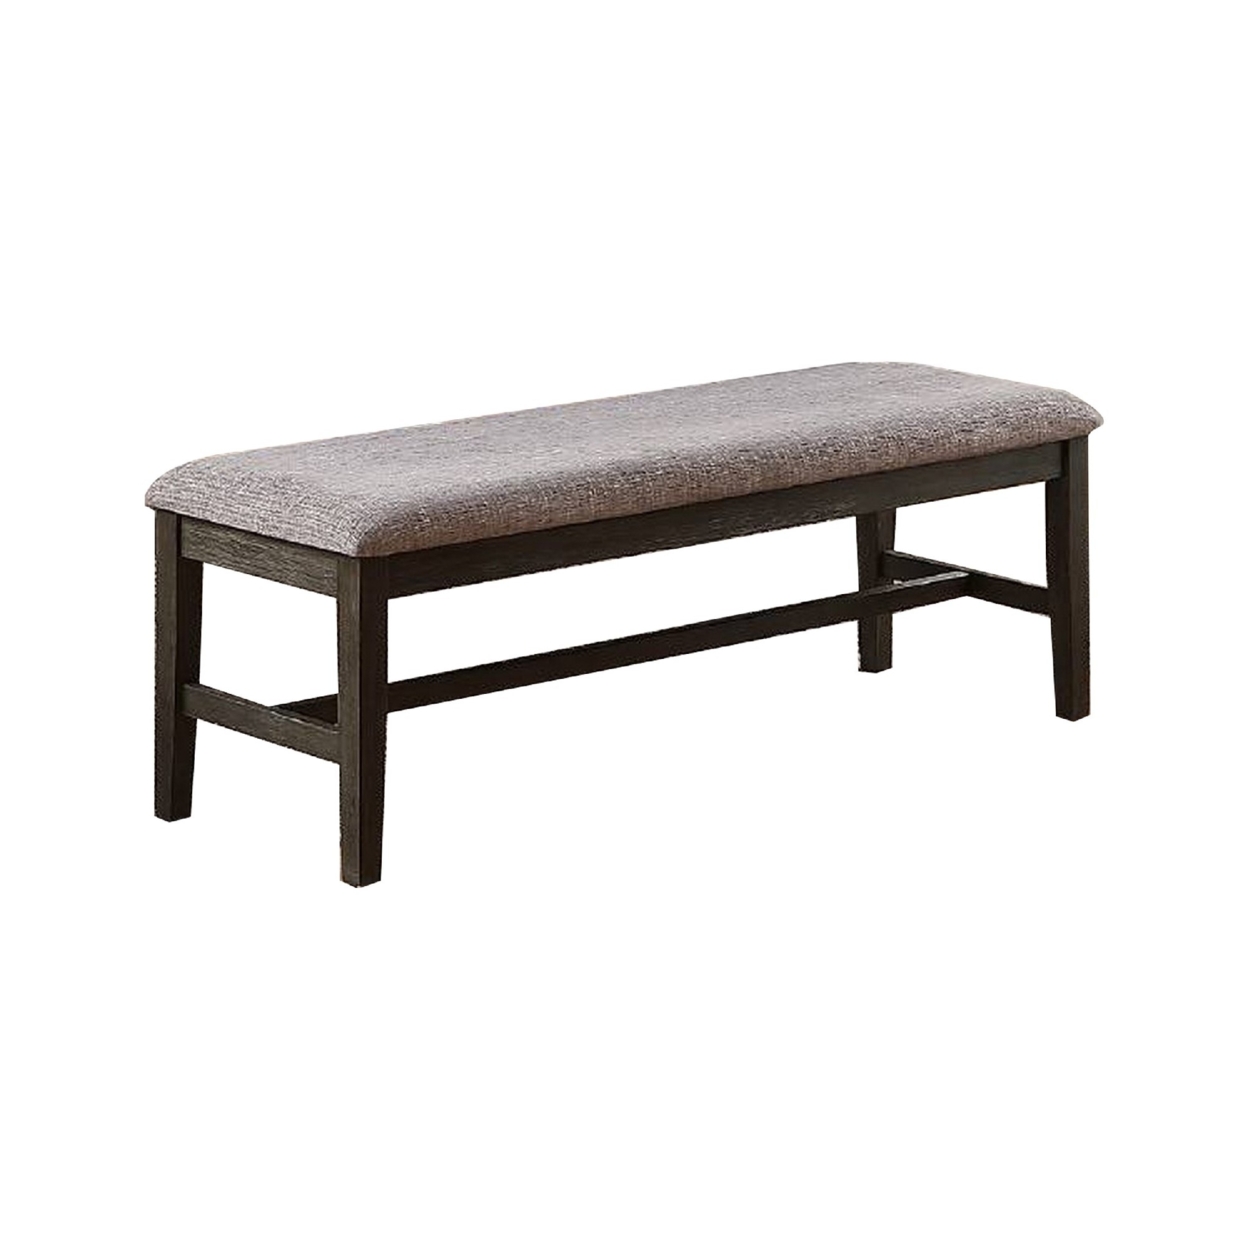 Dining Bench With Fabric Upholstery And Cushioned Seat, Brown- Saltoro Sherpi